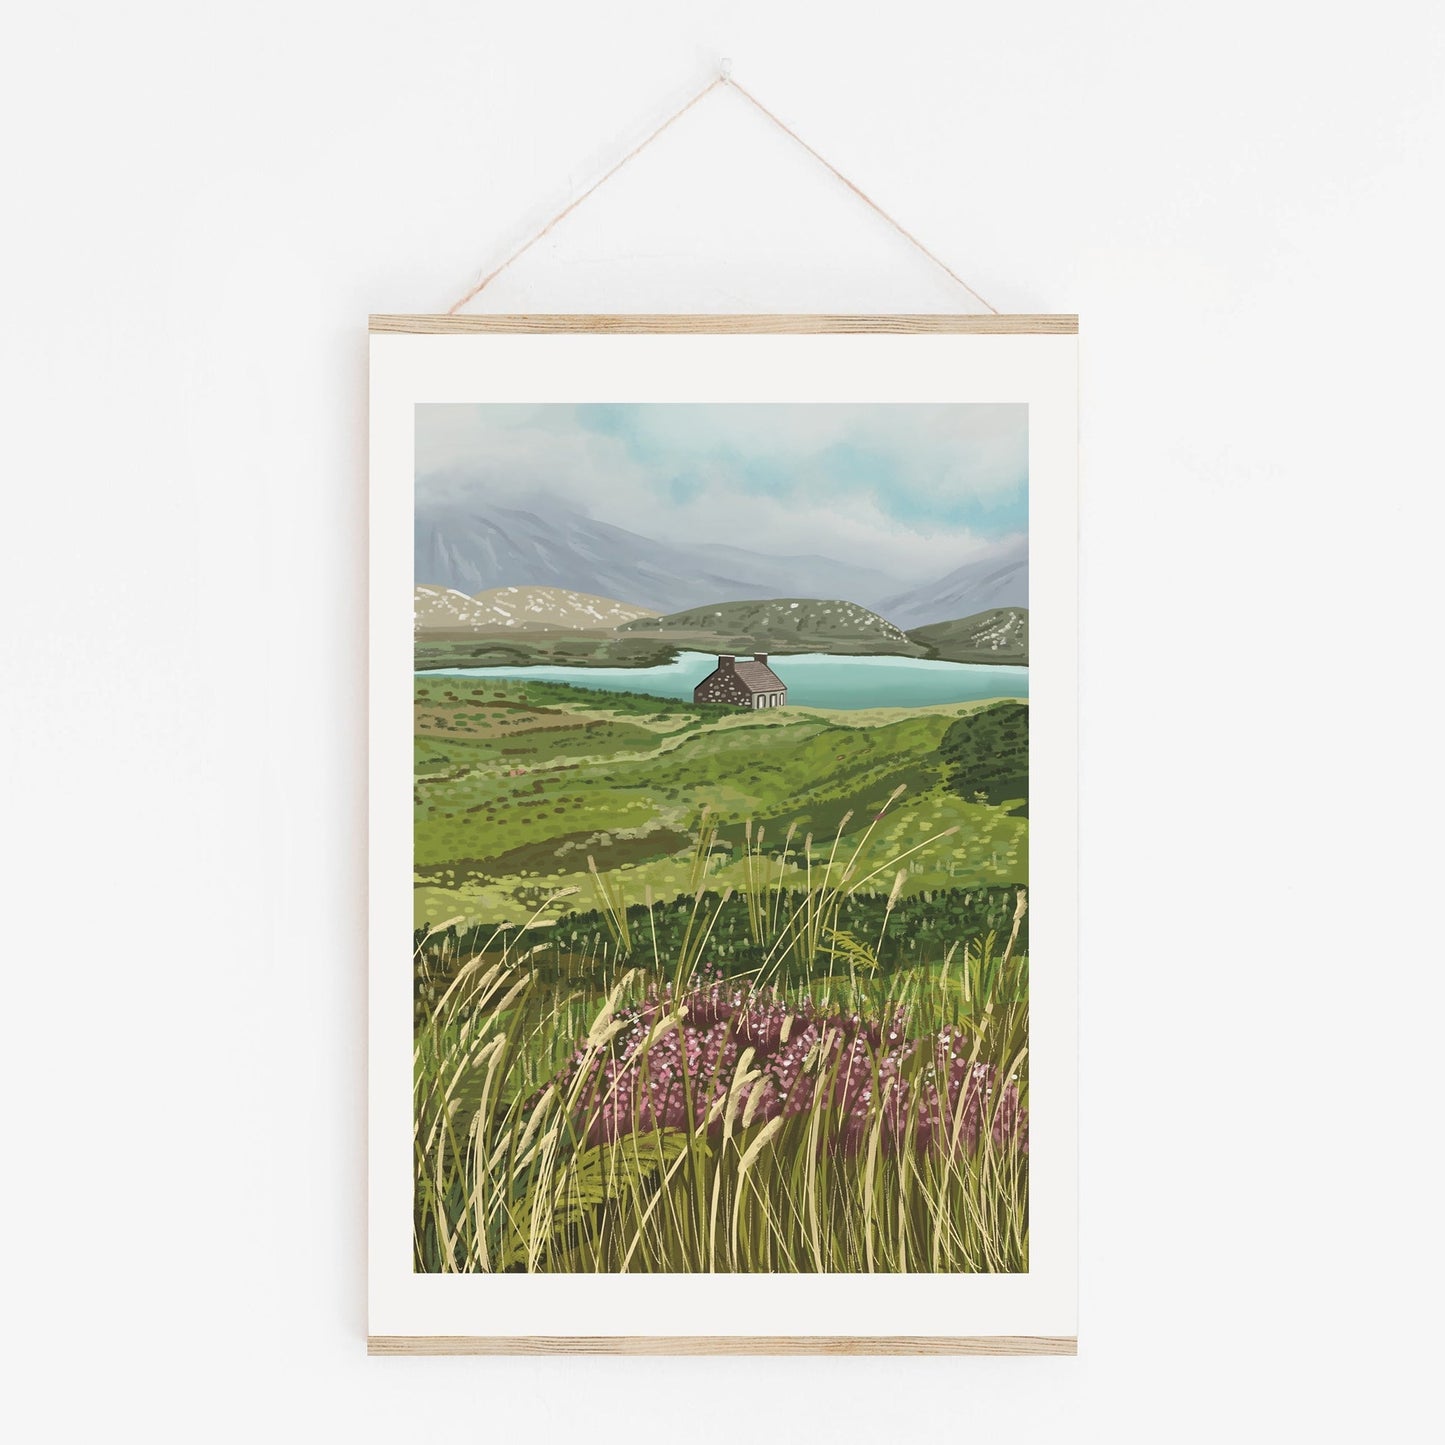 Print of a peaceful bothy nestled in the Scottish highlands from the Pencil Me In stationery shop